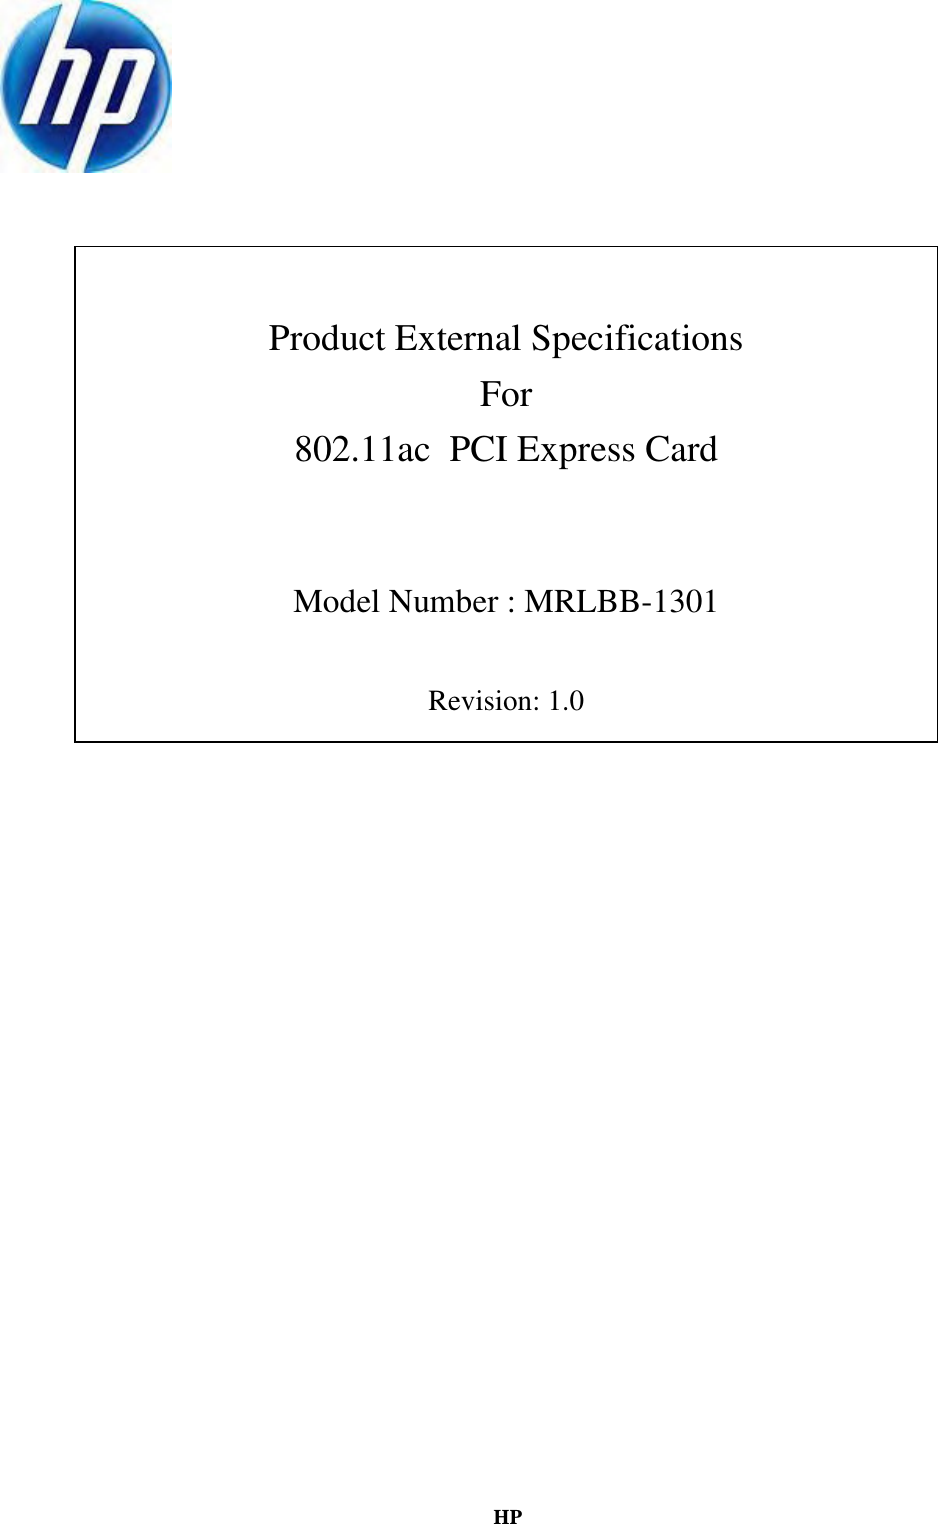 HP      Product External Specifications For 802.11ac  PCI Express Card   Model Number : MRLBB-1301  Revision: 1.0                             